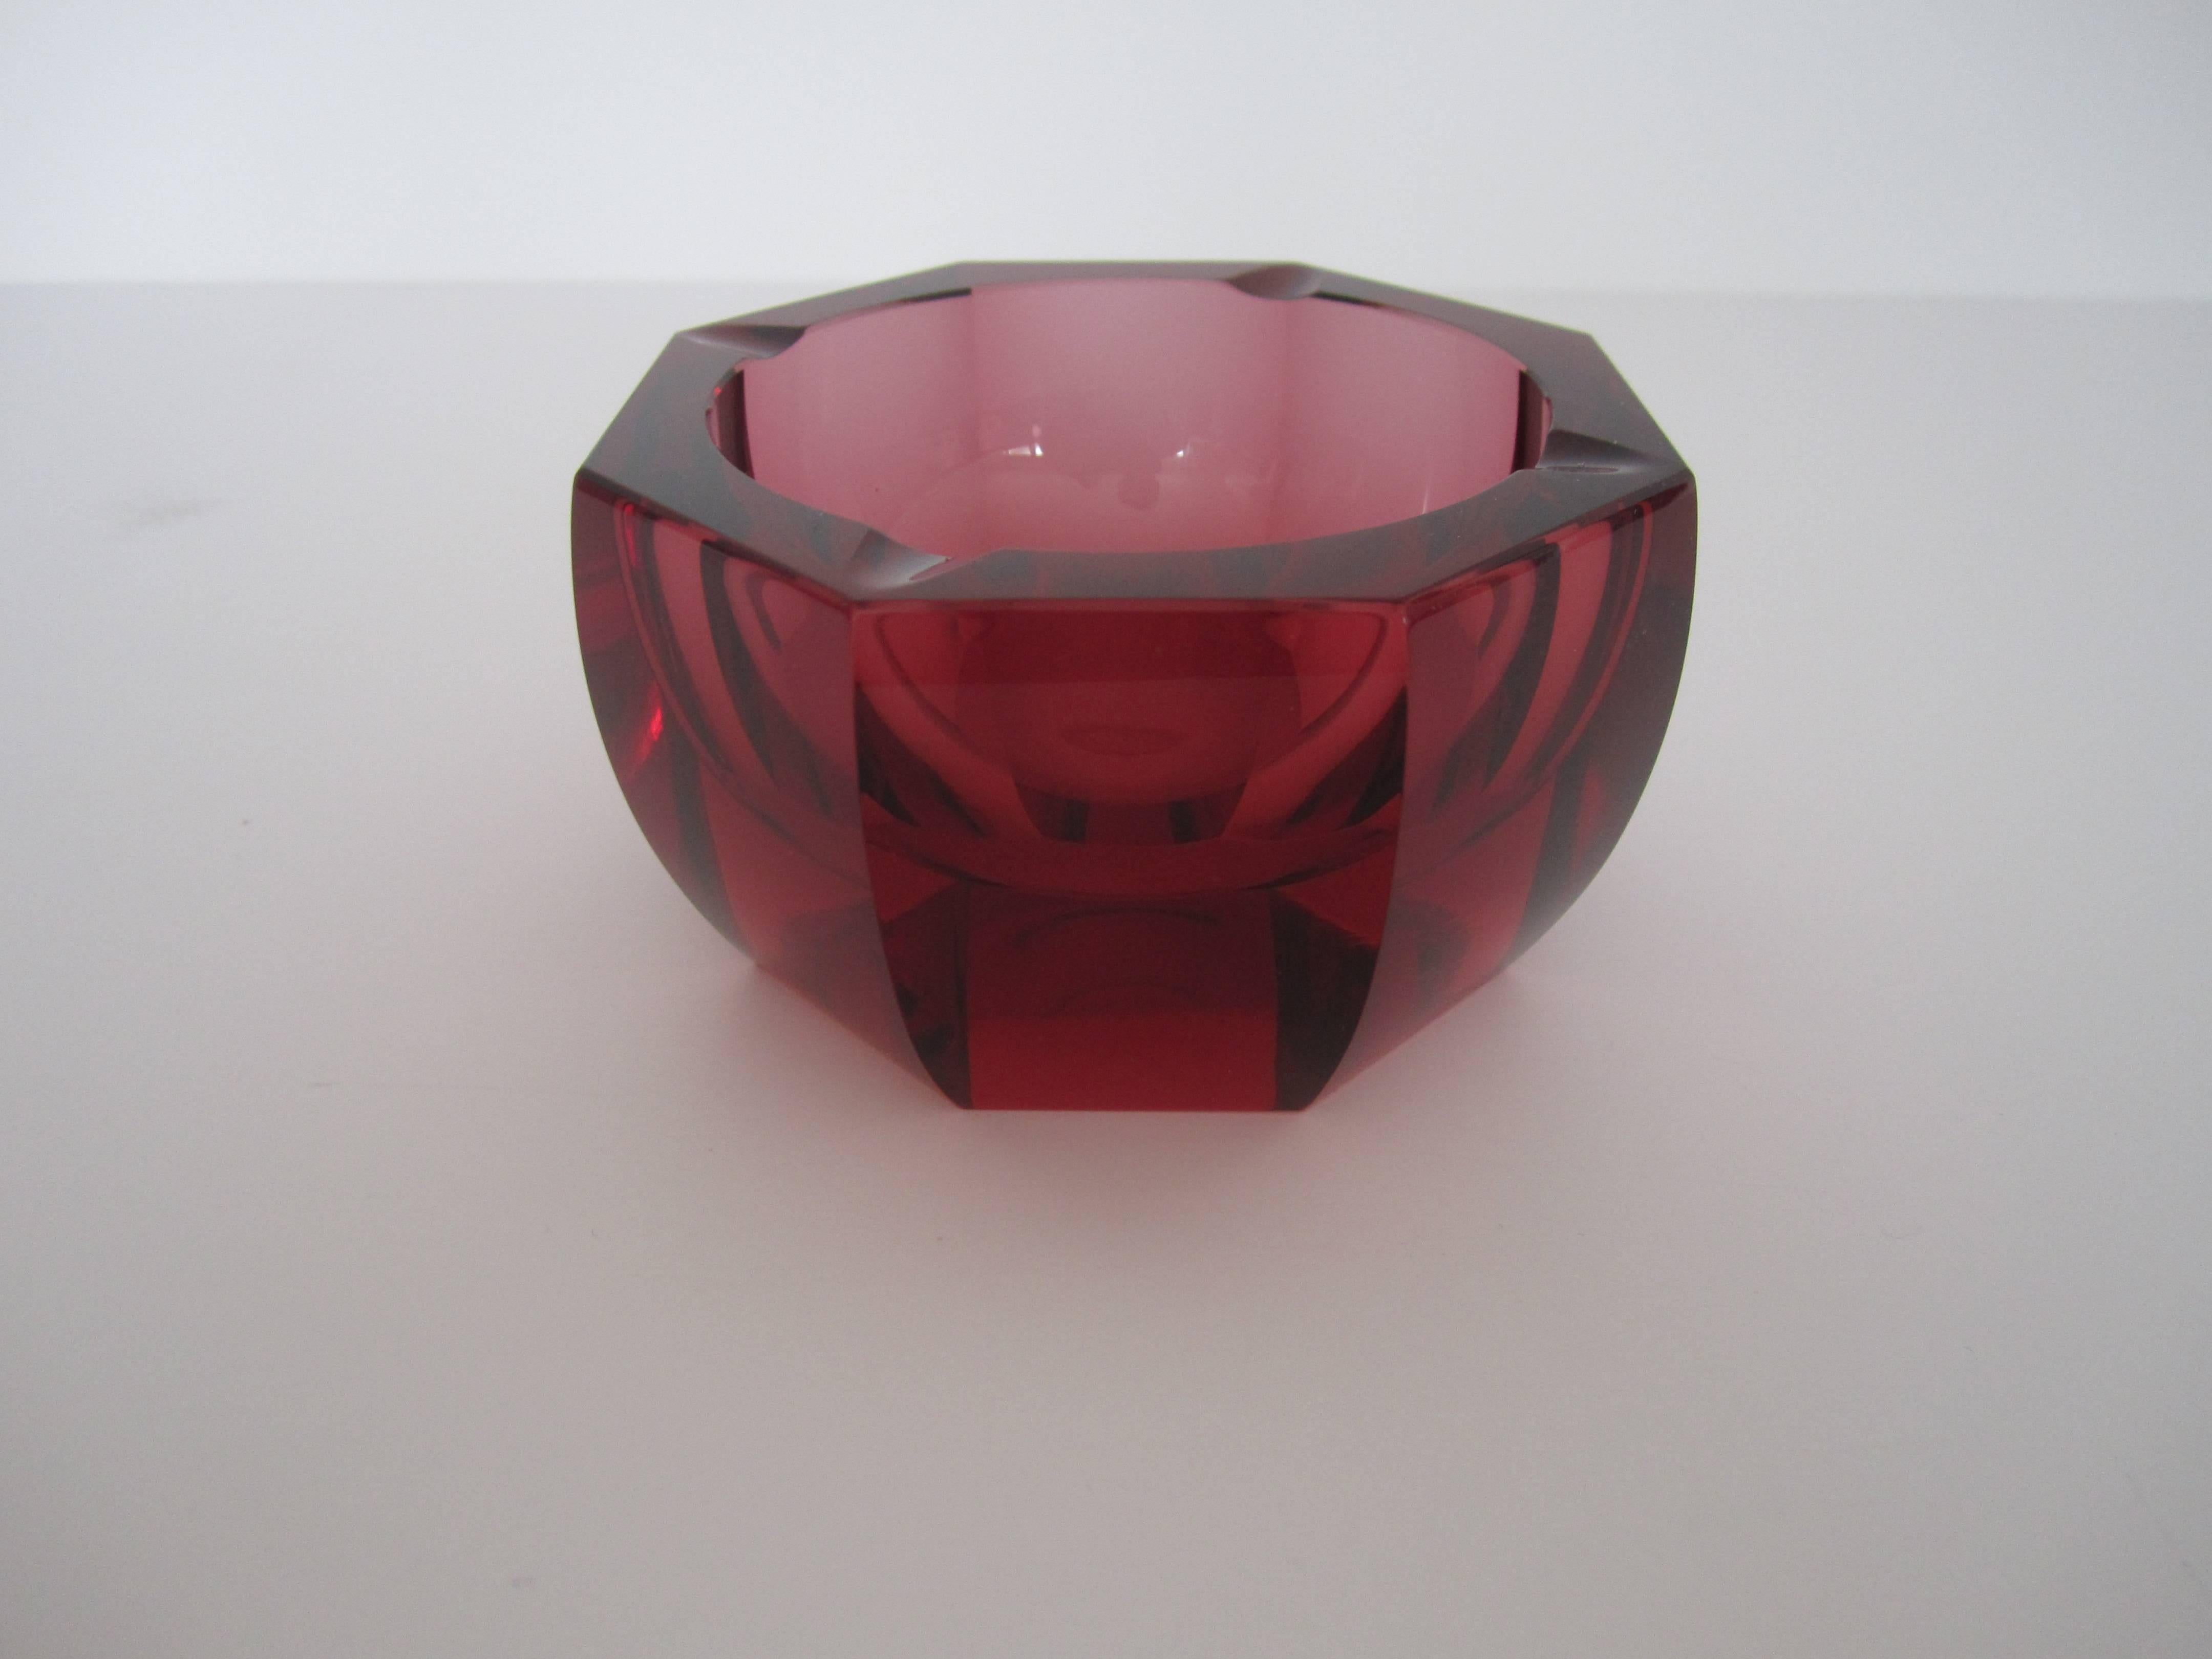 From Moser, a luxury crystal glass company, a gorgeous ruby red octagonal crystal bowl or ashtray. With Markers Mark on bottom as seen in image. Excellent condition with no chips.